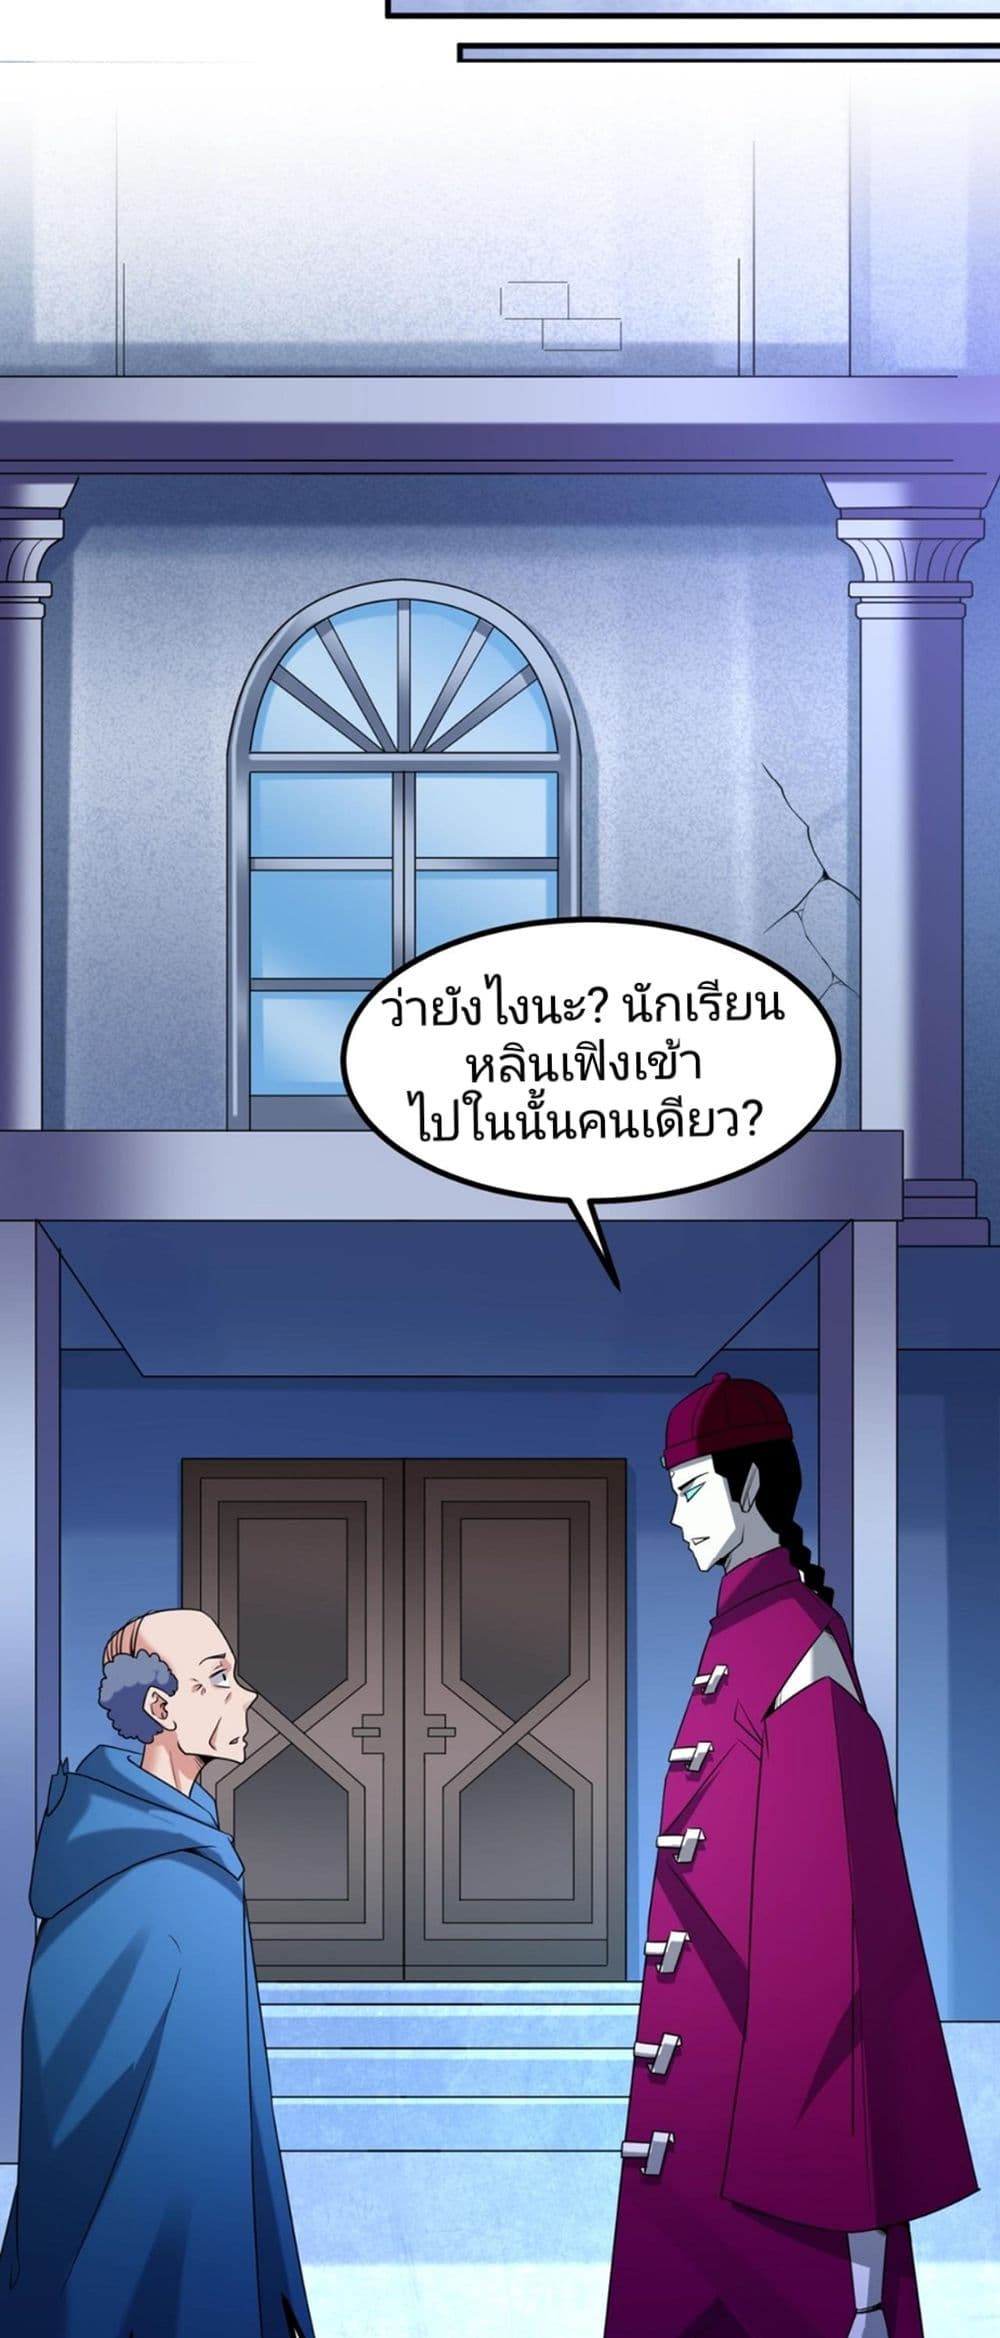 The Age of Ghost Spirits à¸à¸­à¸à¸à¸µà¹ 5 (13)